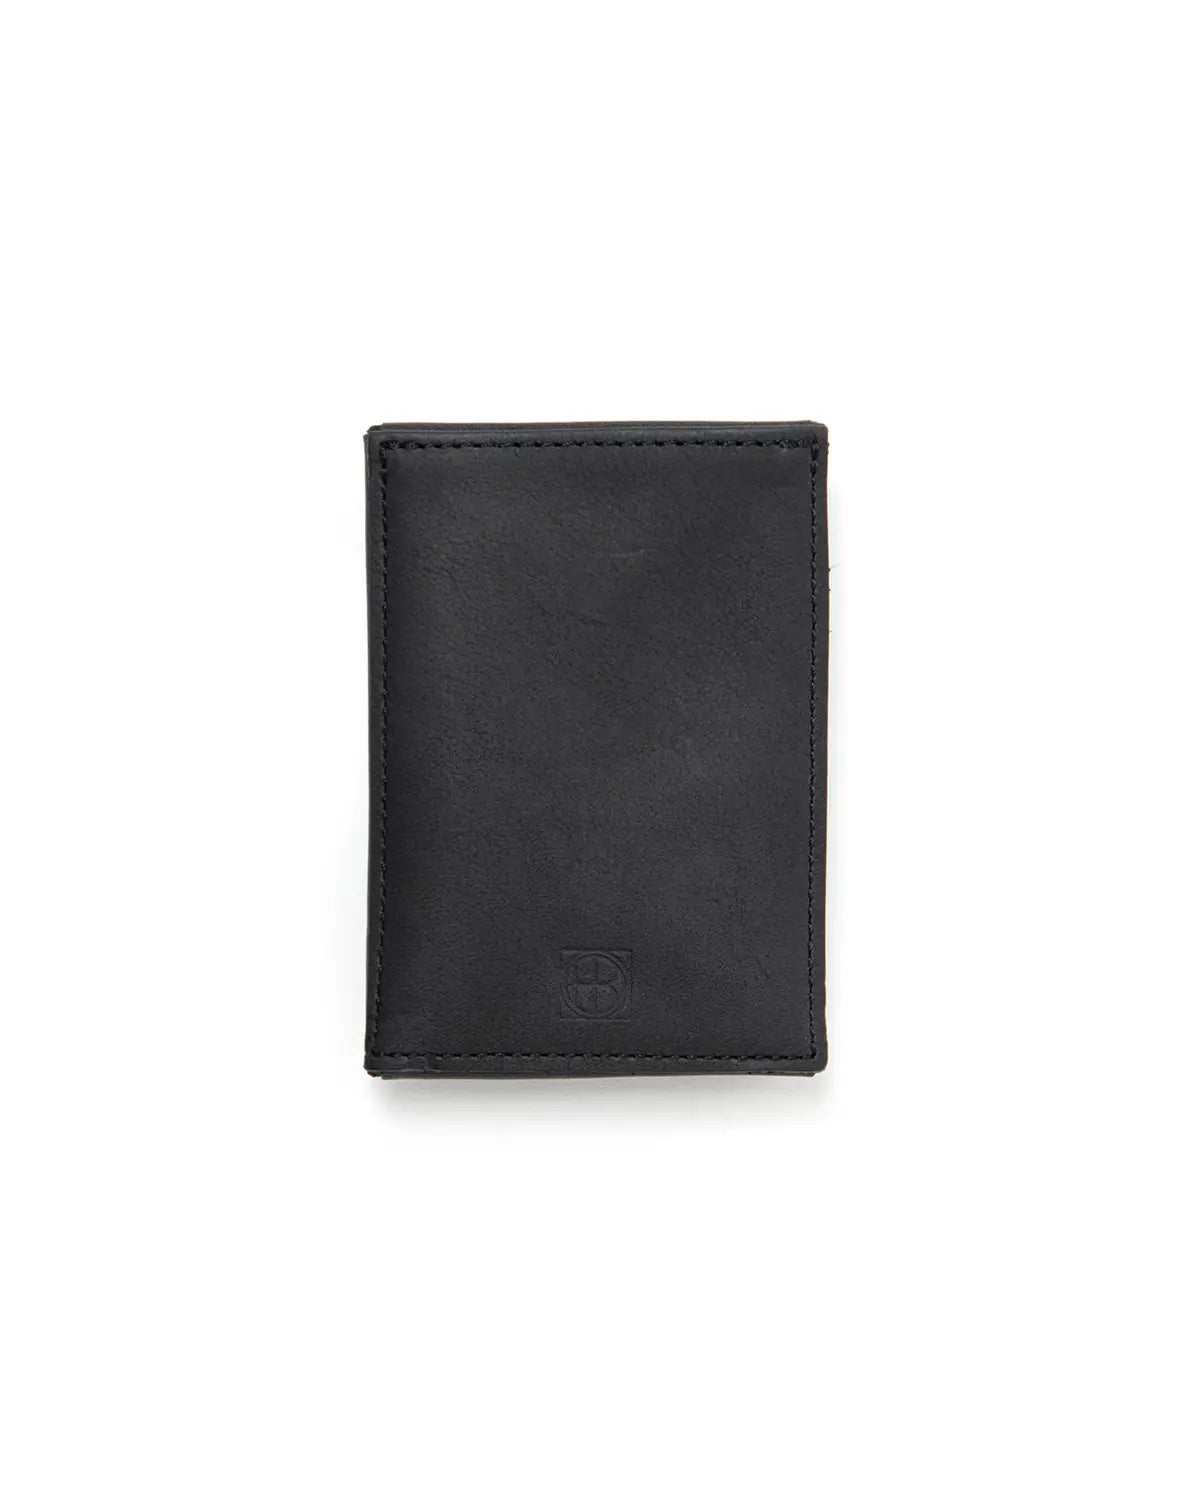 Hobo 24AW COIN / CARD CASE COW LEATHER